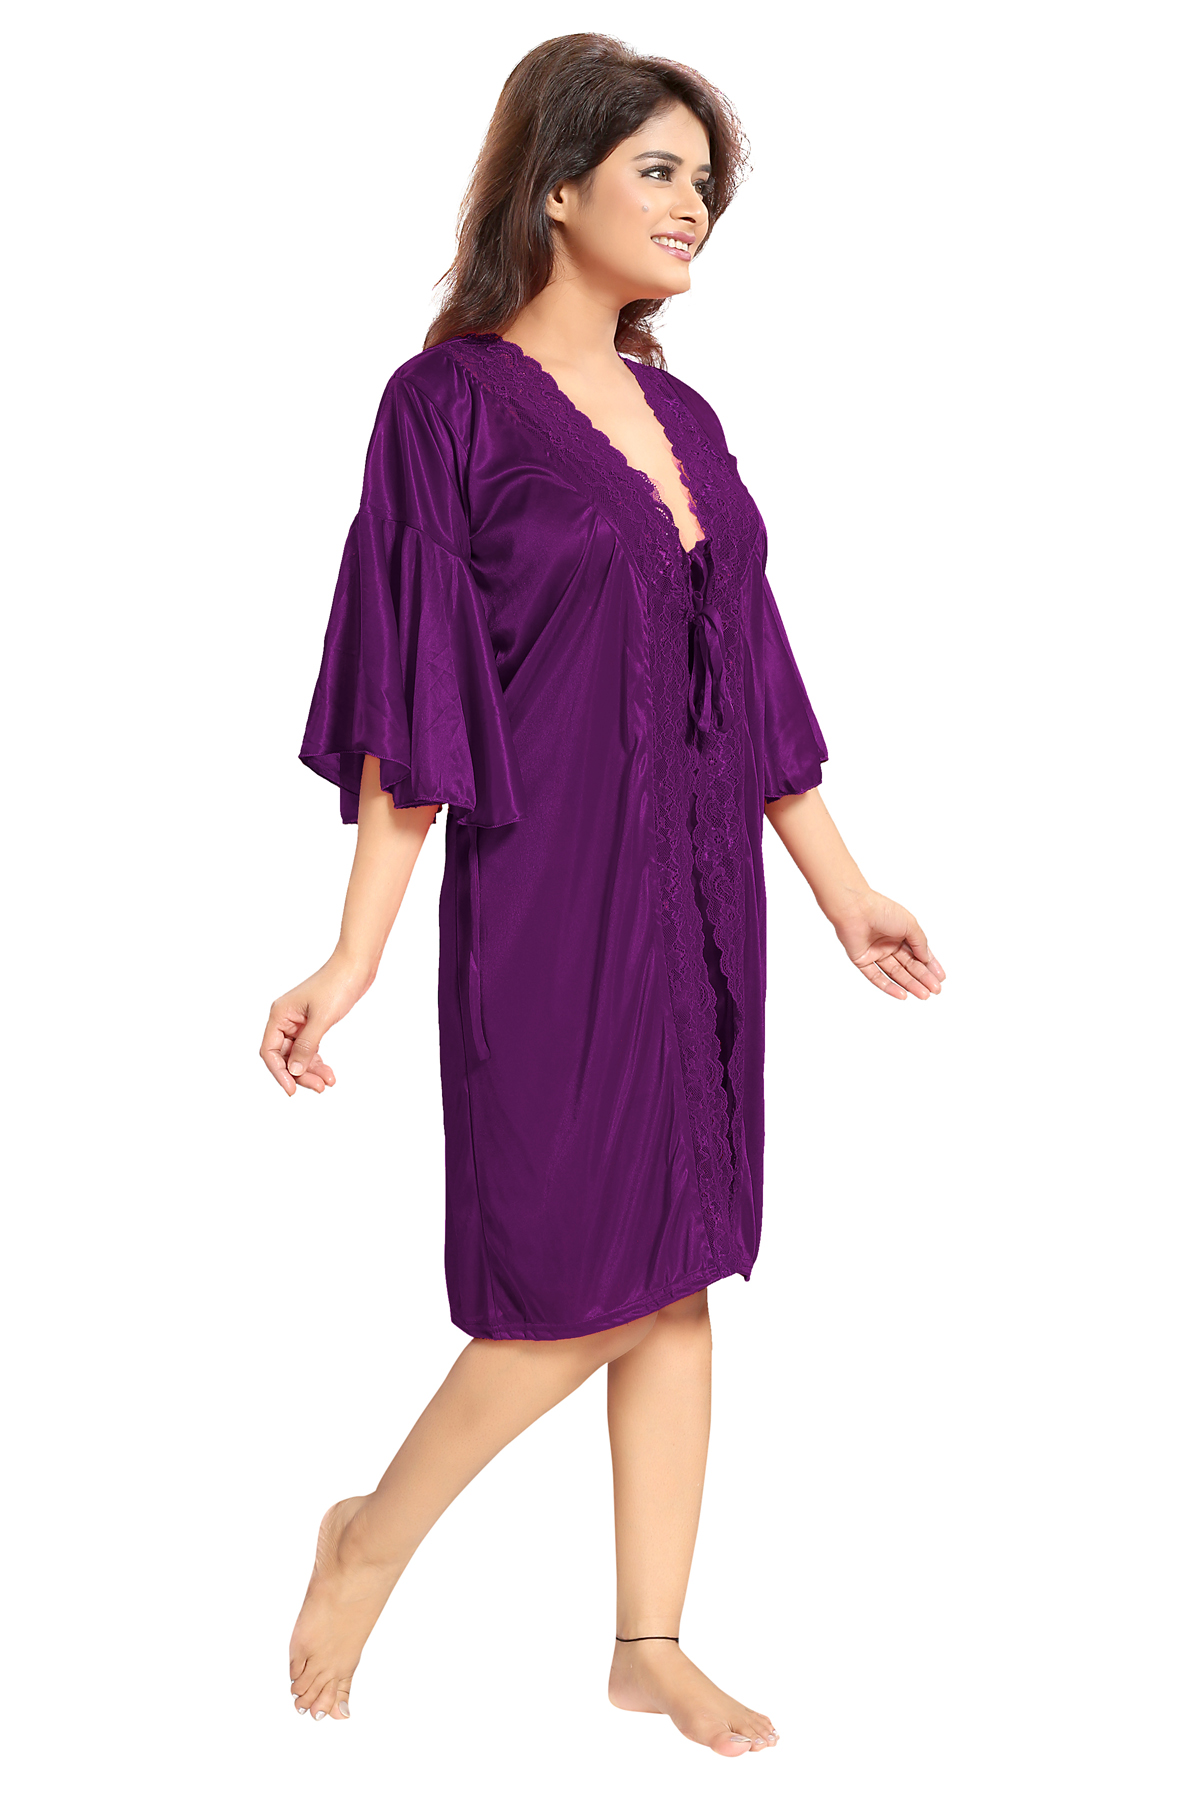 Buy Be You Purple Satin Women Nighty with Robe Online @ ₹799 from ShopClues